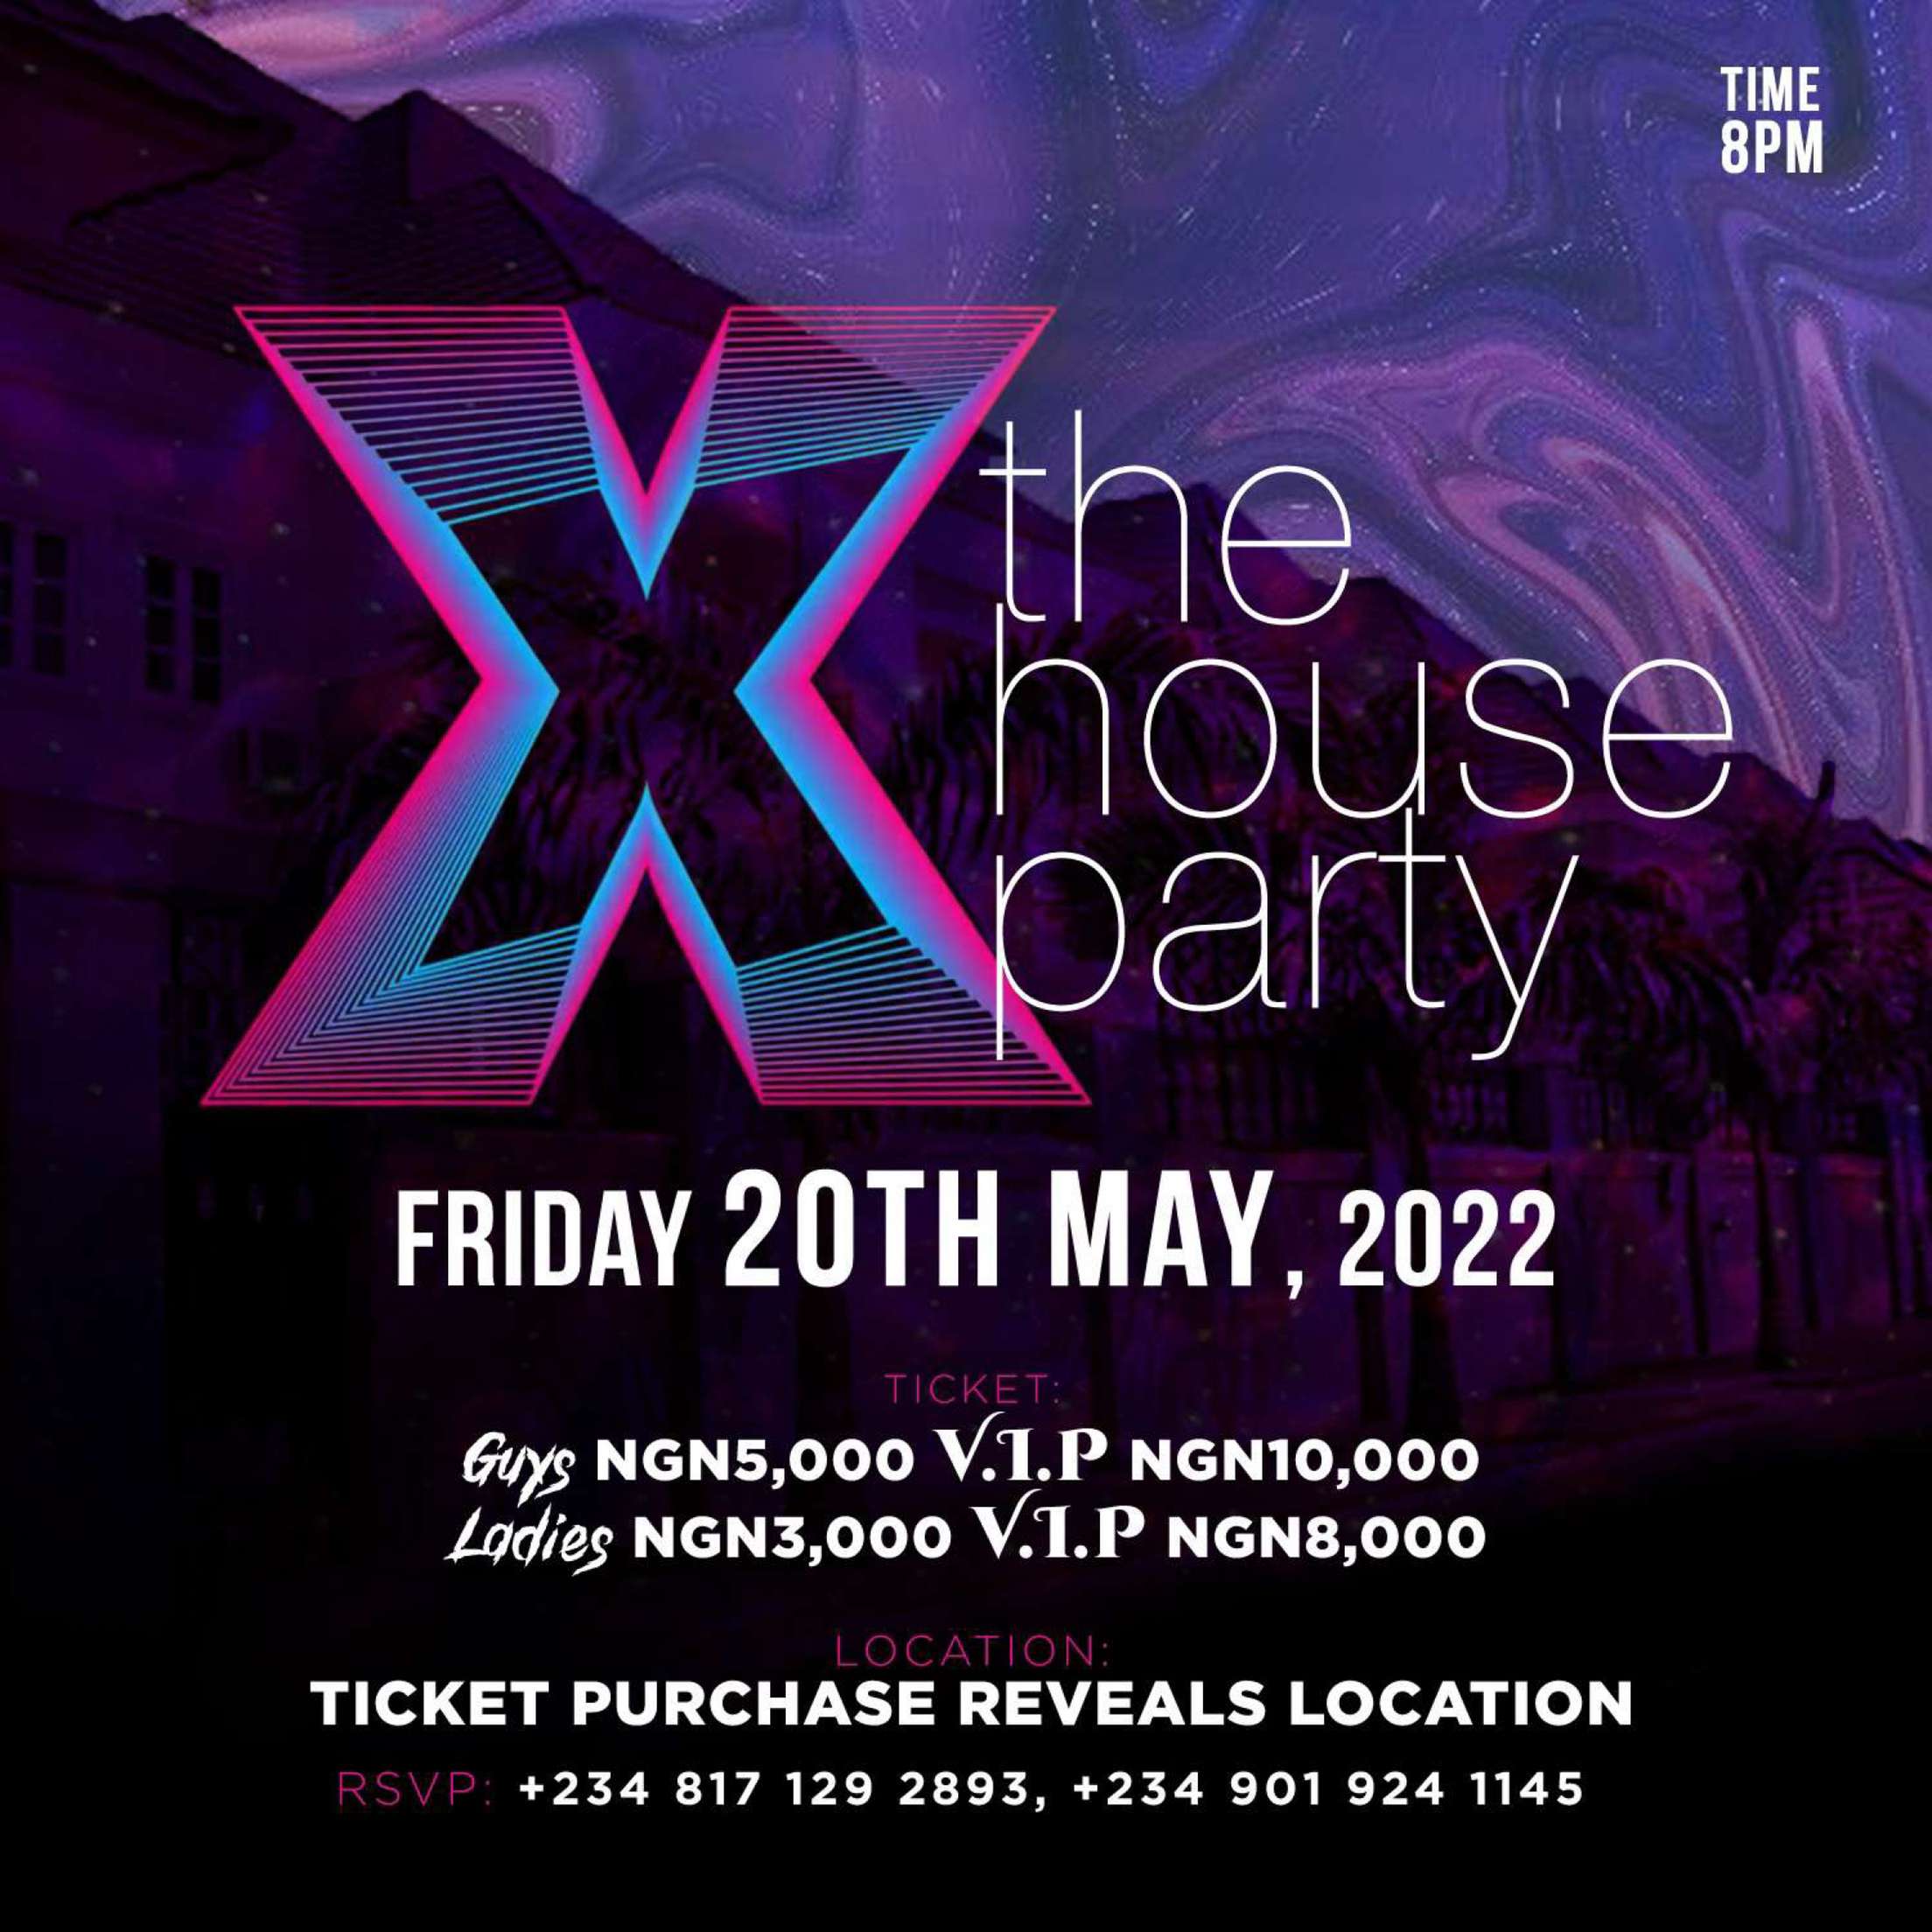 X TheHouseParty Post free event in Nigeria using tickethub.ng, buy and sell tickets to event